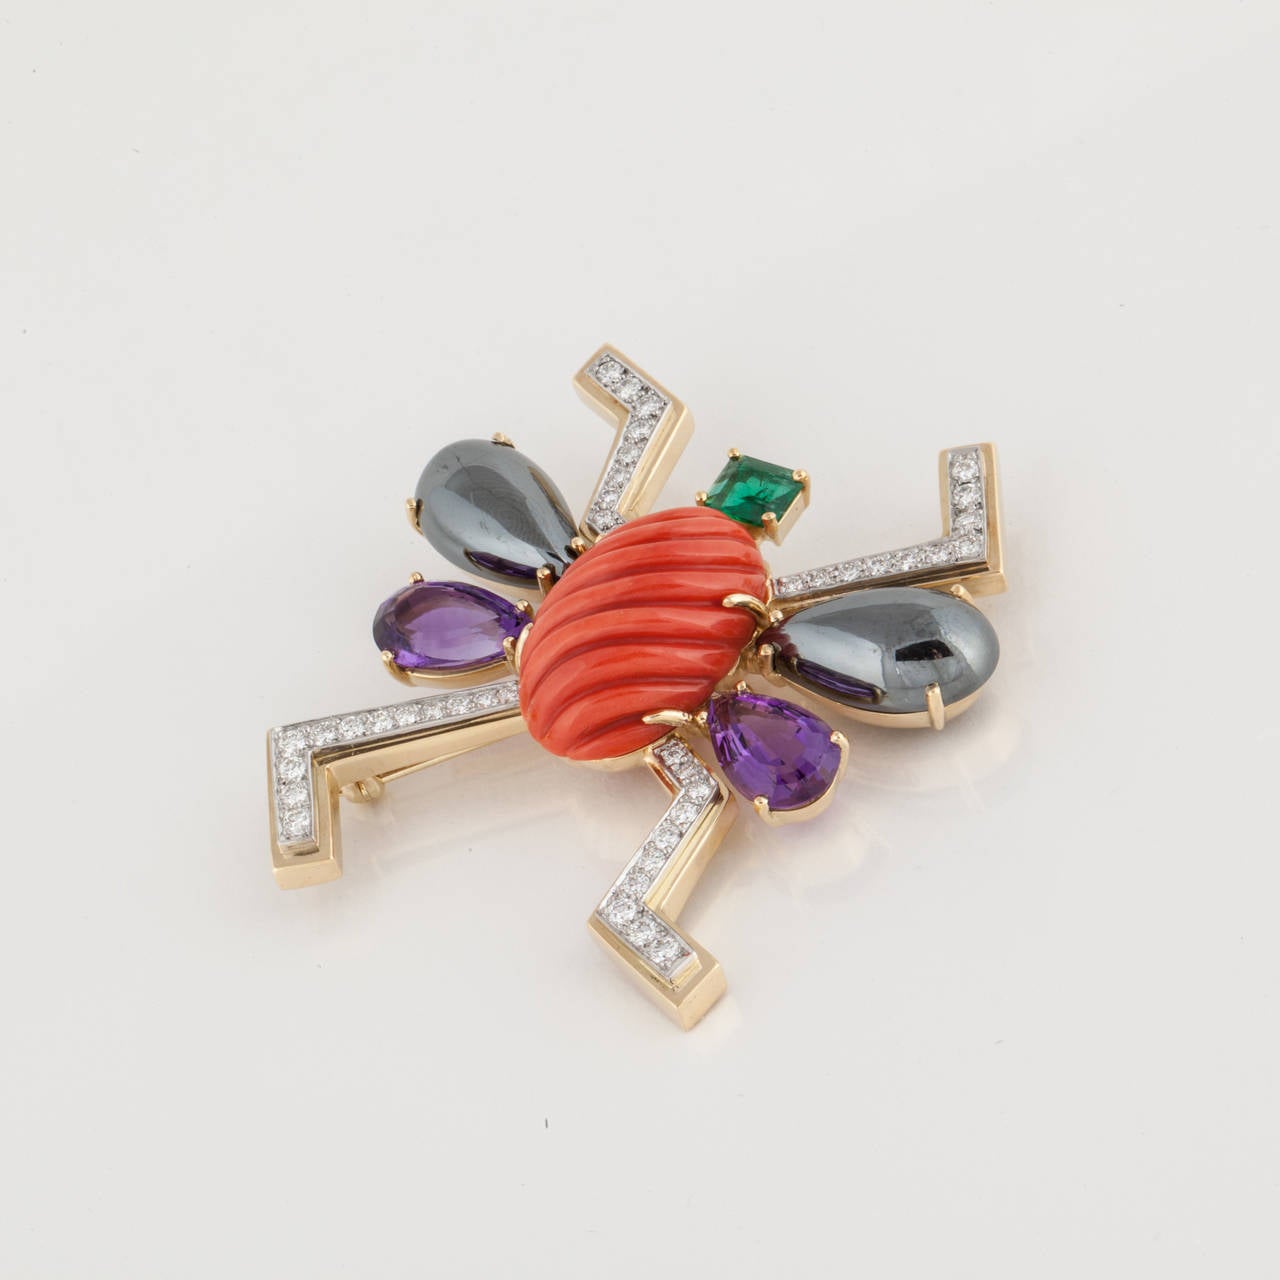 Paloma Picasso for Tiffany 18K yellow gold bug pin.  Body is comprised of an emerald, hematite, amethyst, red coral and diamonds.  Dated 1988.  Inscribed on back 